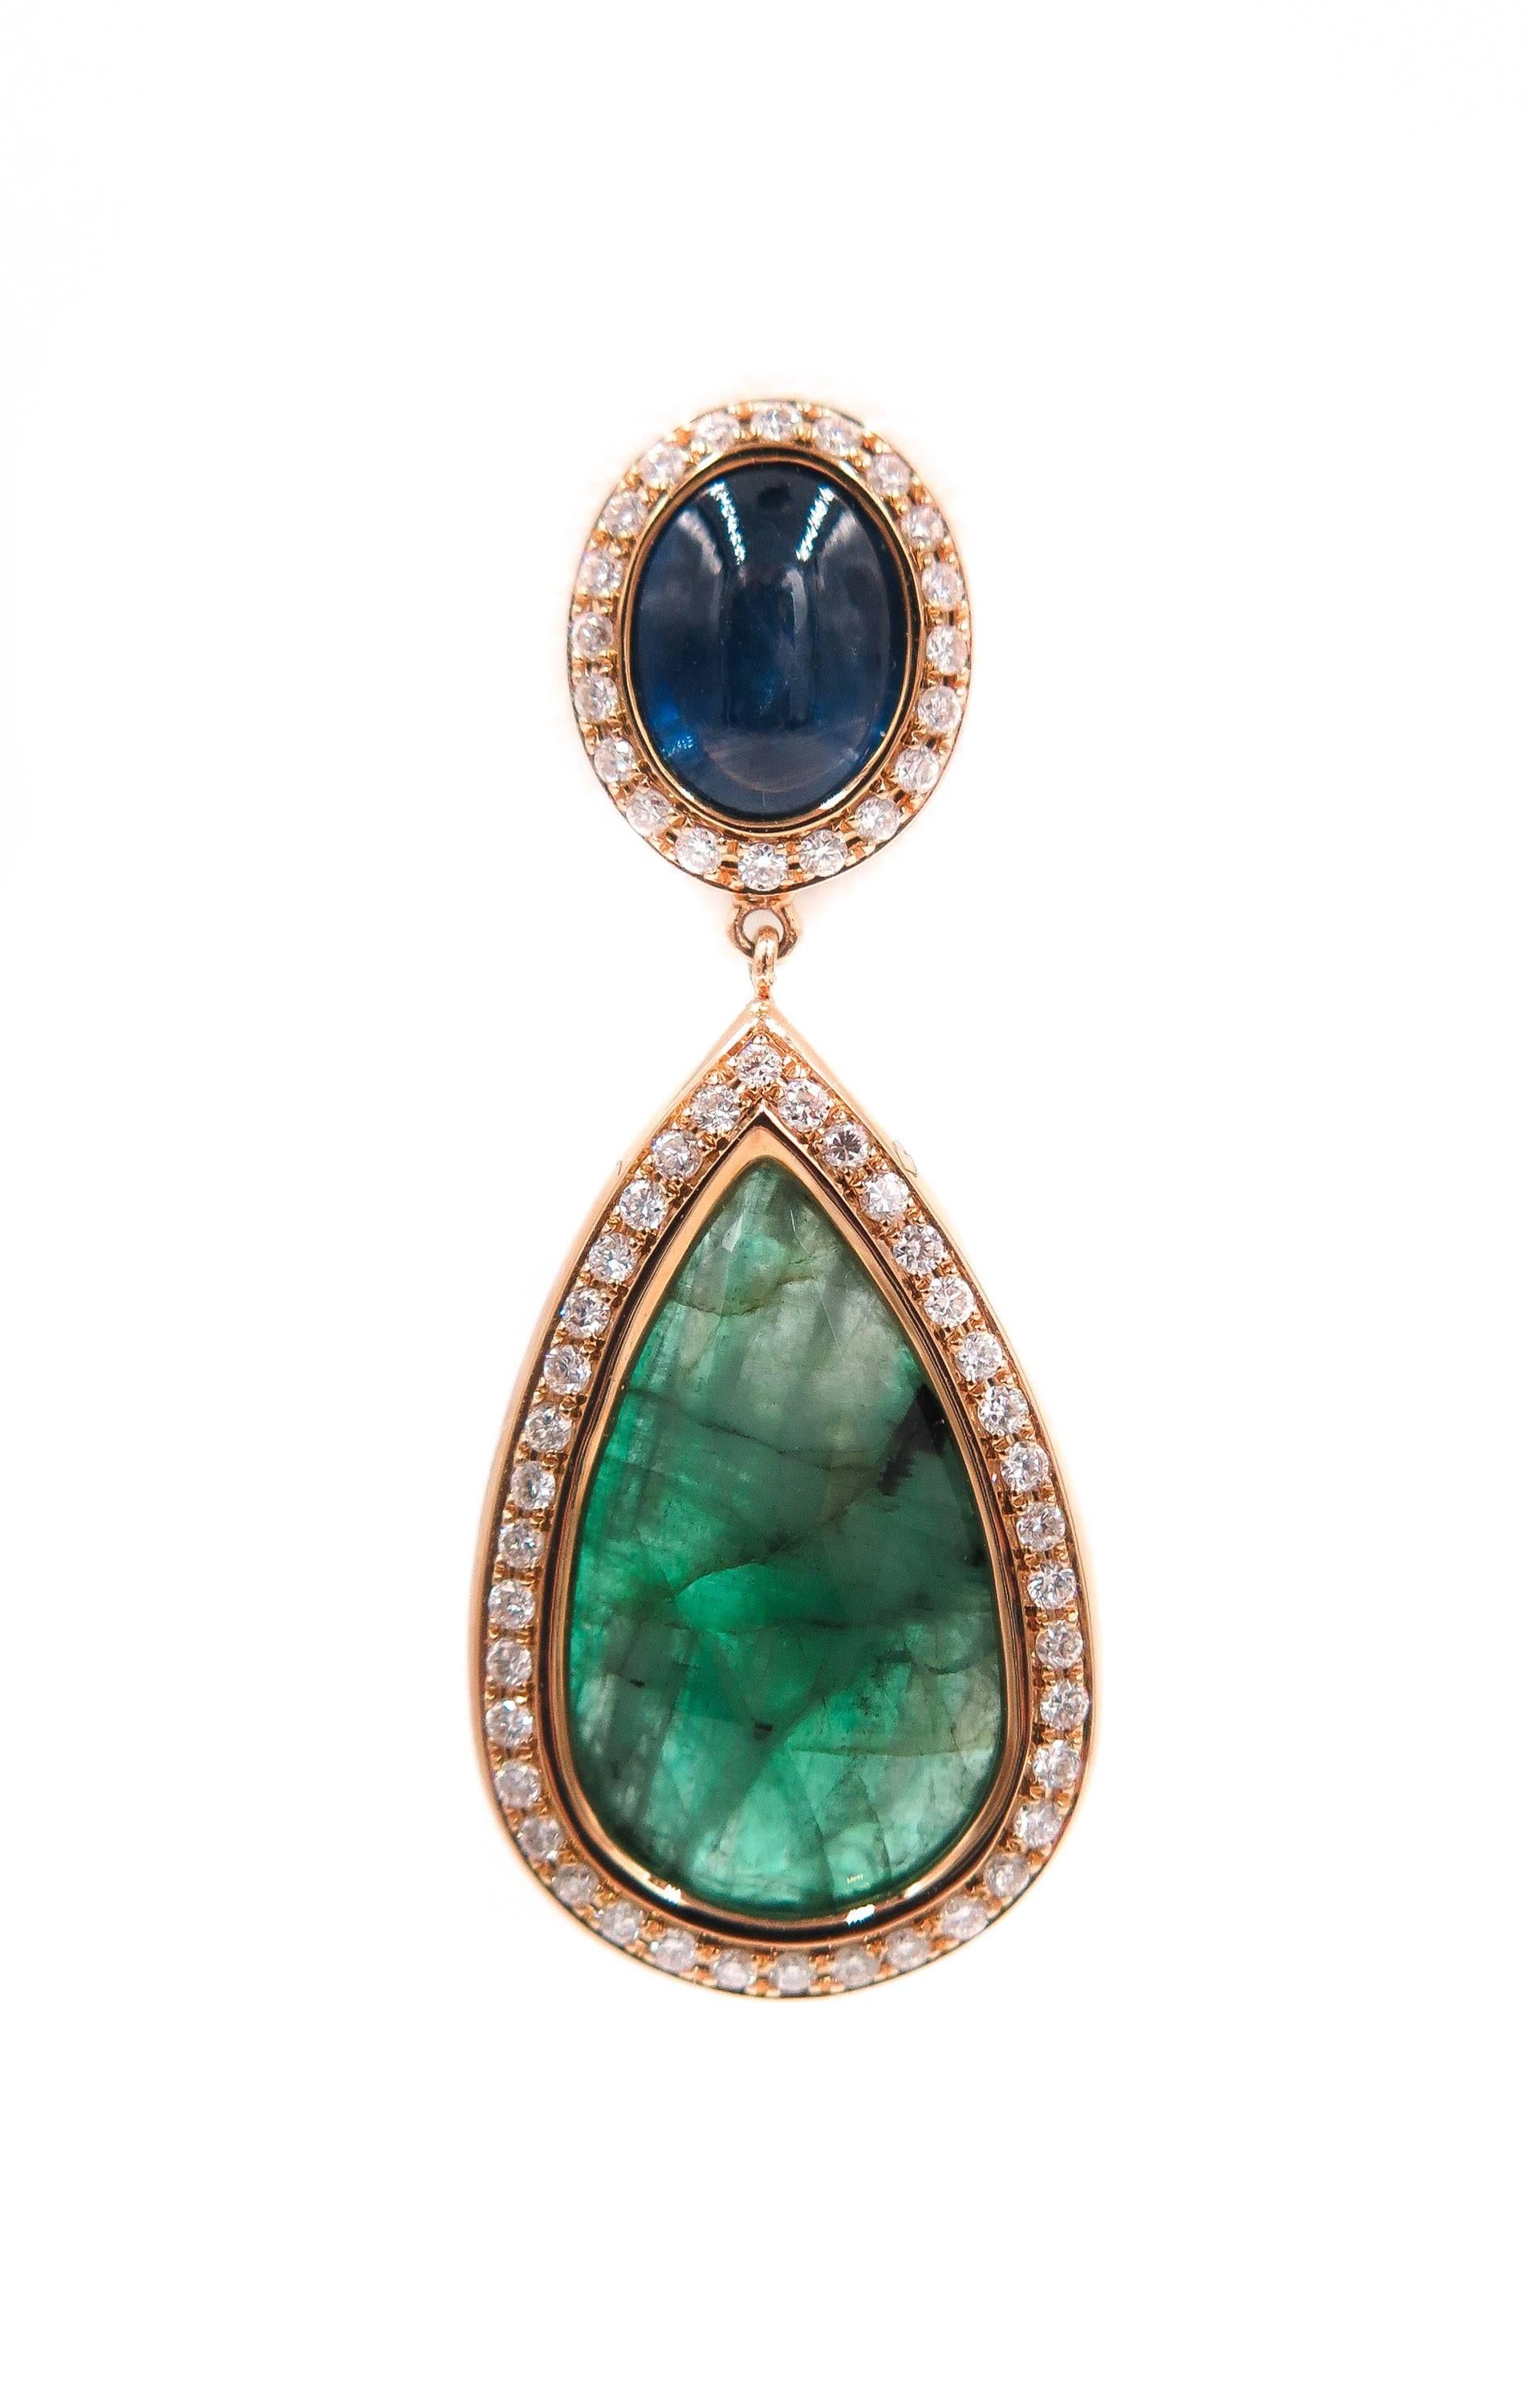 Exotic and Contemporary Drop Earrings.
Created by the Portuguese designer Monseo, revealing the essence and timeless beauty of the Emerald and Sapphire.  
This unique pair of earrings are handcrafted in 19K yellow gold and surrounded by 116 white